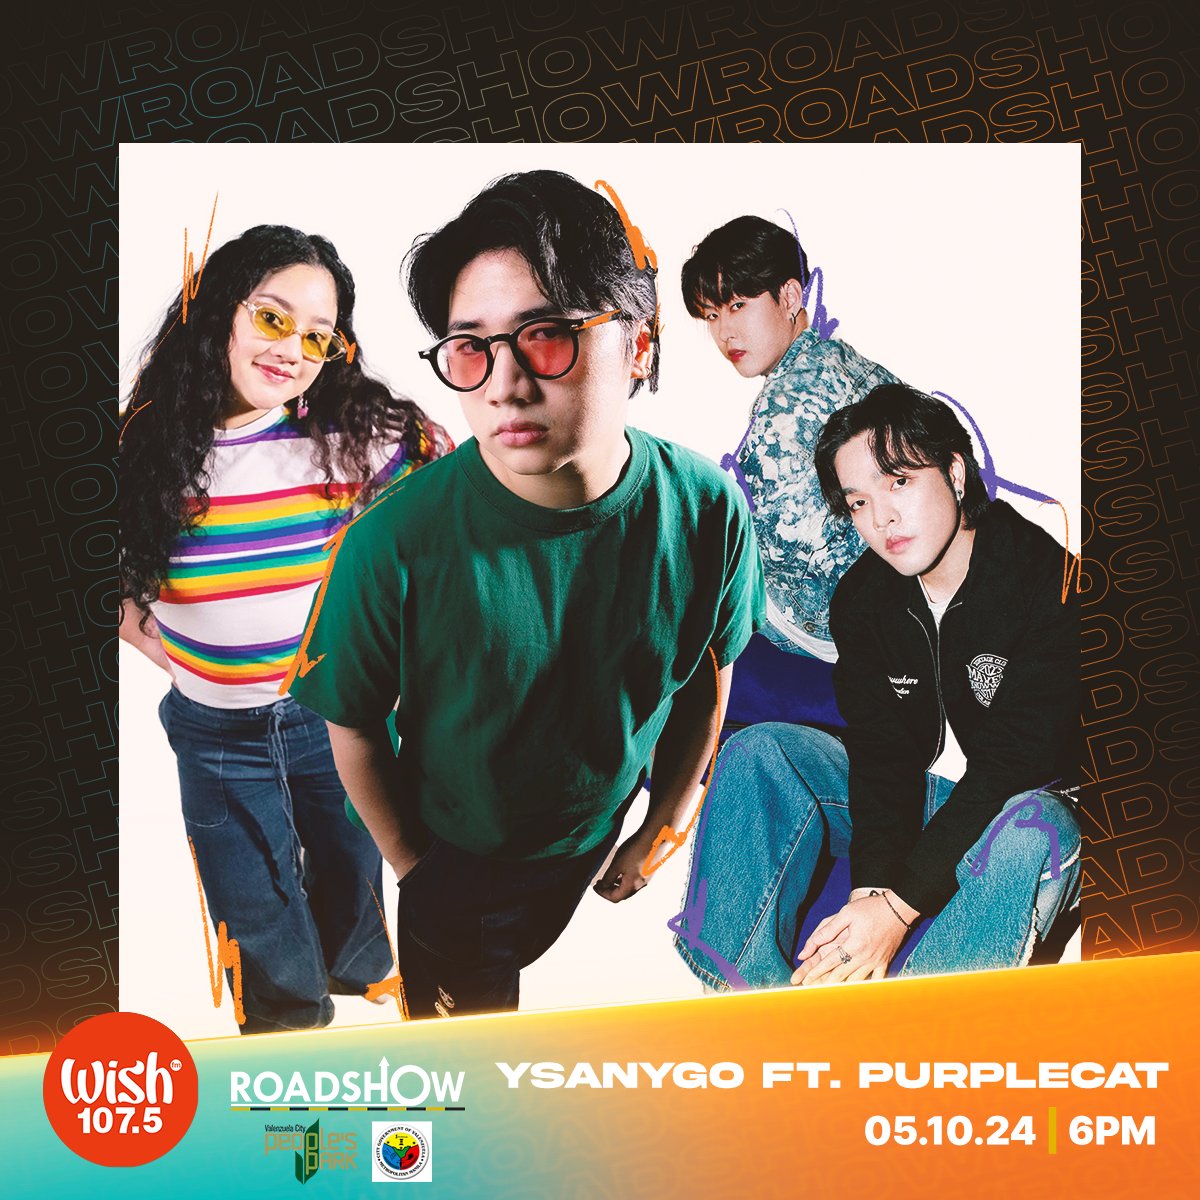 Today's Roadshow will feature the live Wish Bus performances of pop-punk act @LUNARLIGHTSPH featuring CHNDTR and sibling duo @Ysanygo featuring Purplecat! Watch them perform live at Valenzuela City People's Park at 4 p.m. PHT.